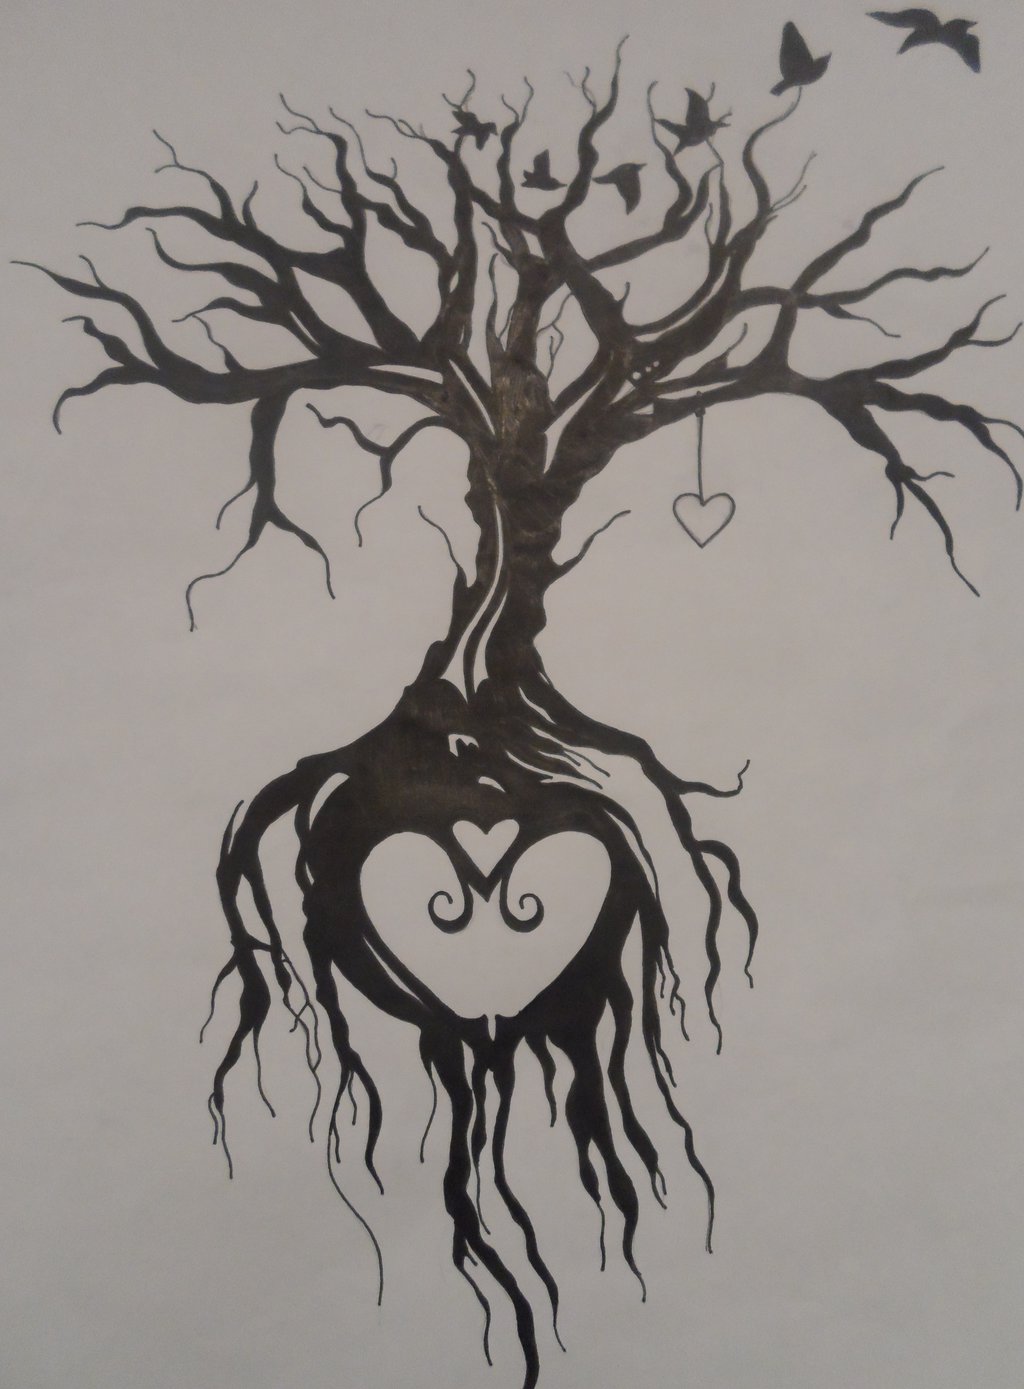 Heart Tree Of Life With Flying Birds Tattoo Design By EmmyBunny